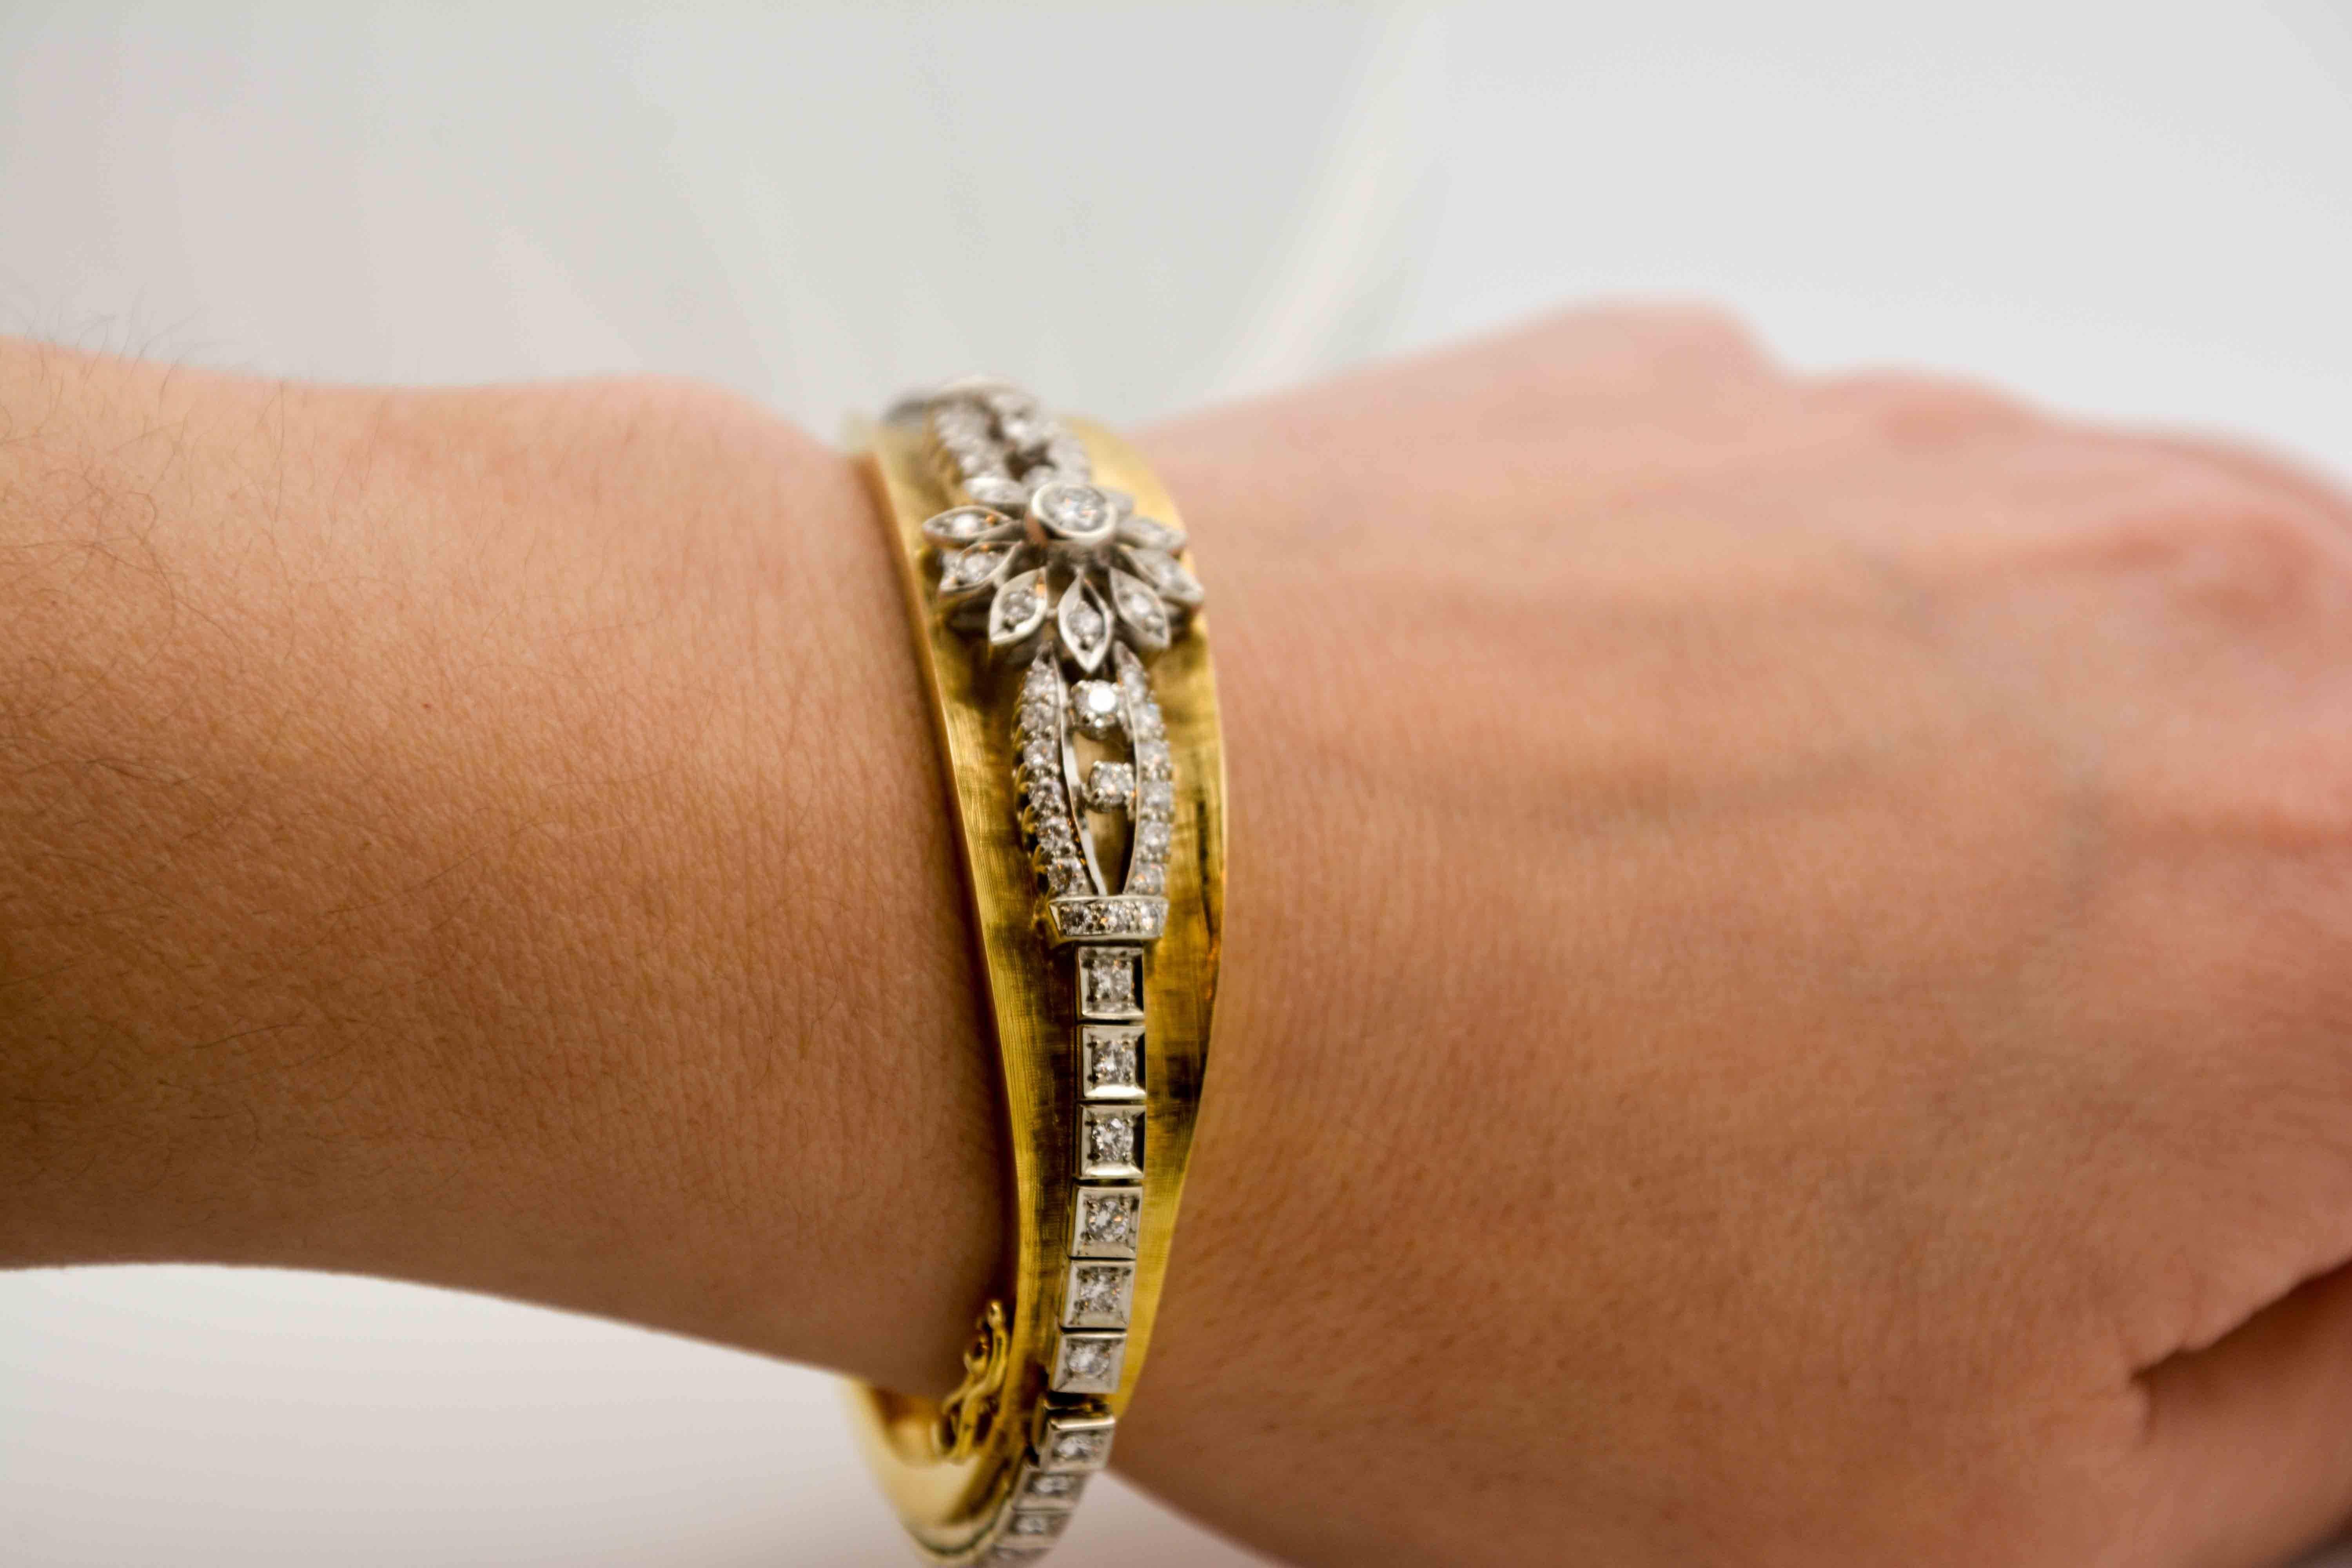 This 14 Karat Yellow gold bracelet is so easy to love. Like the so-welcomed hint of spring with diamonds set in a flower shape, this bangle bracelet is light, yet it has great character with diamonds set in 14 karat white gold cascading down each